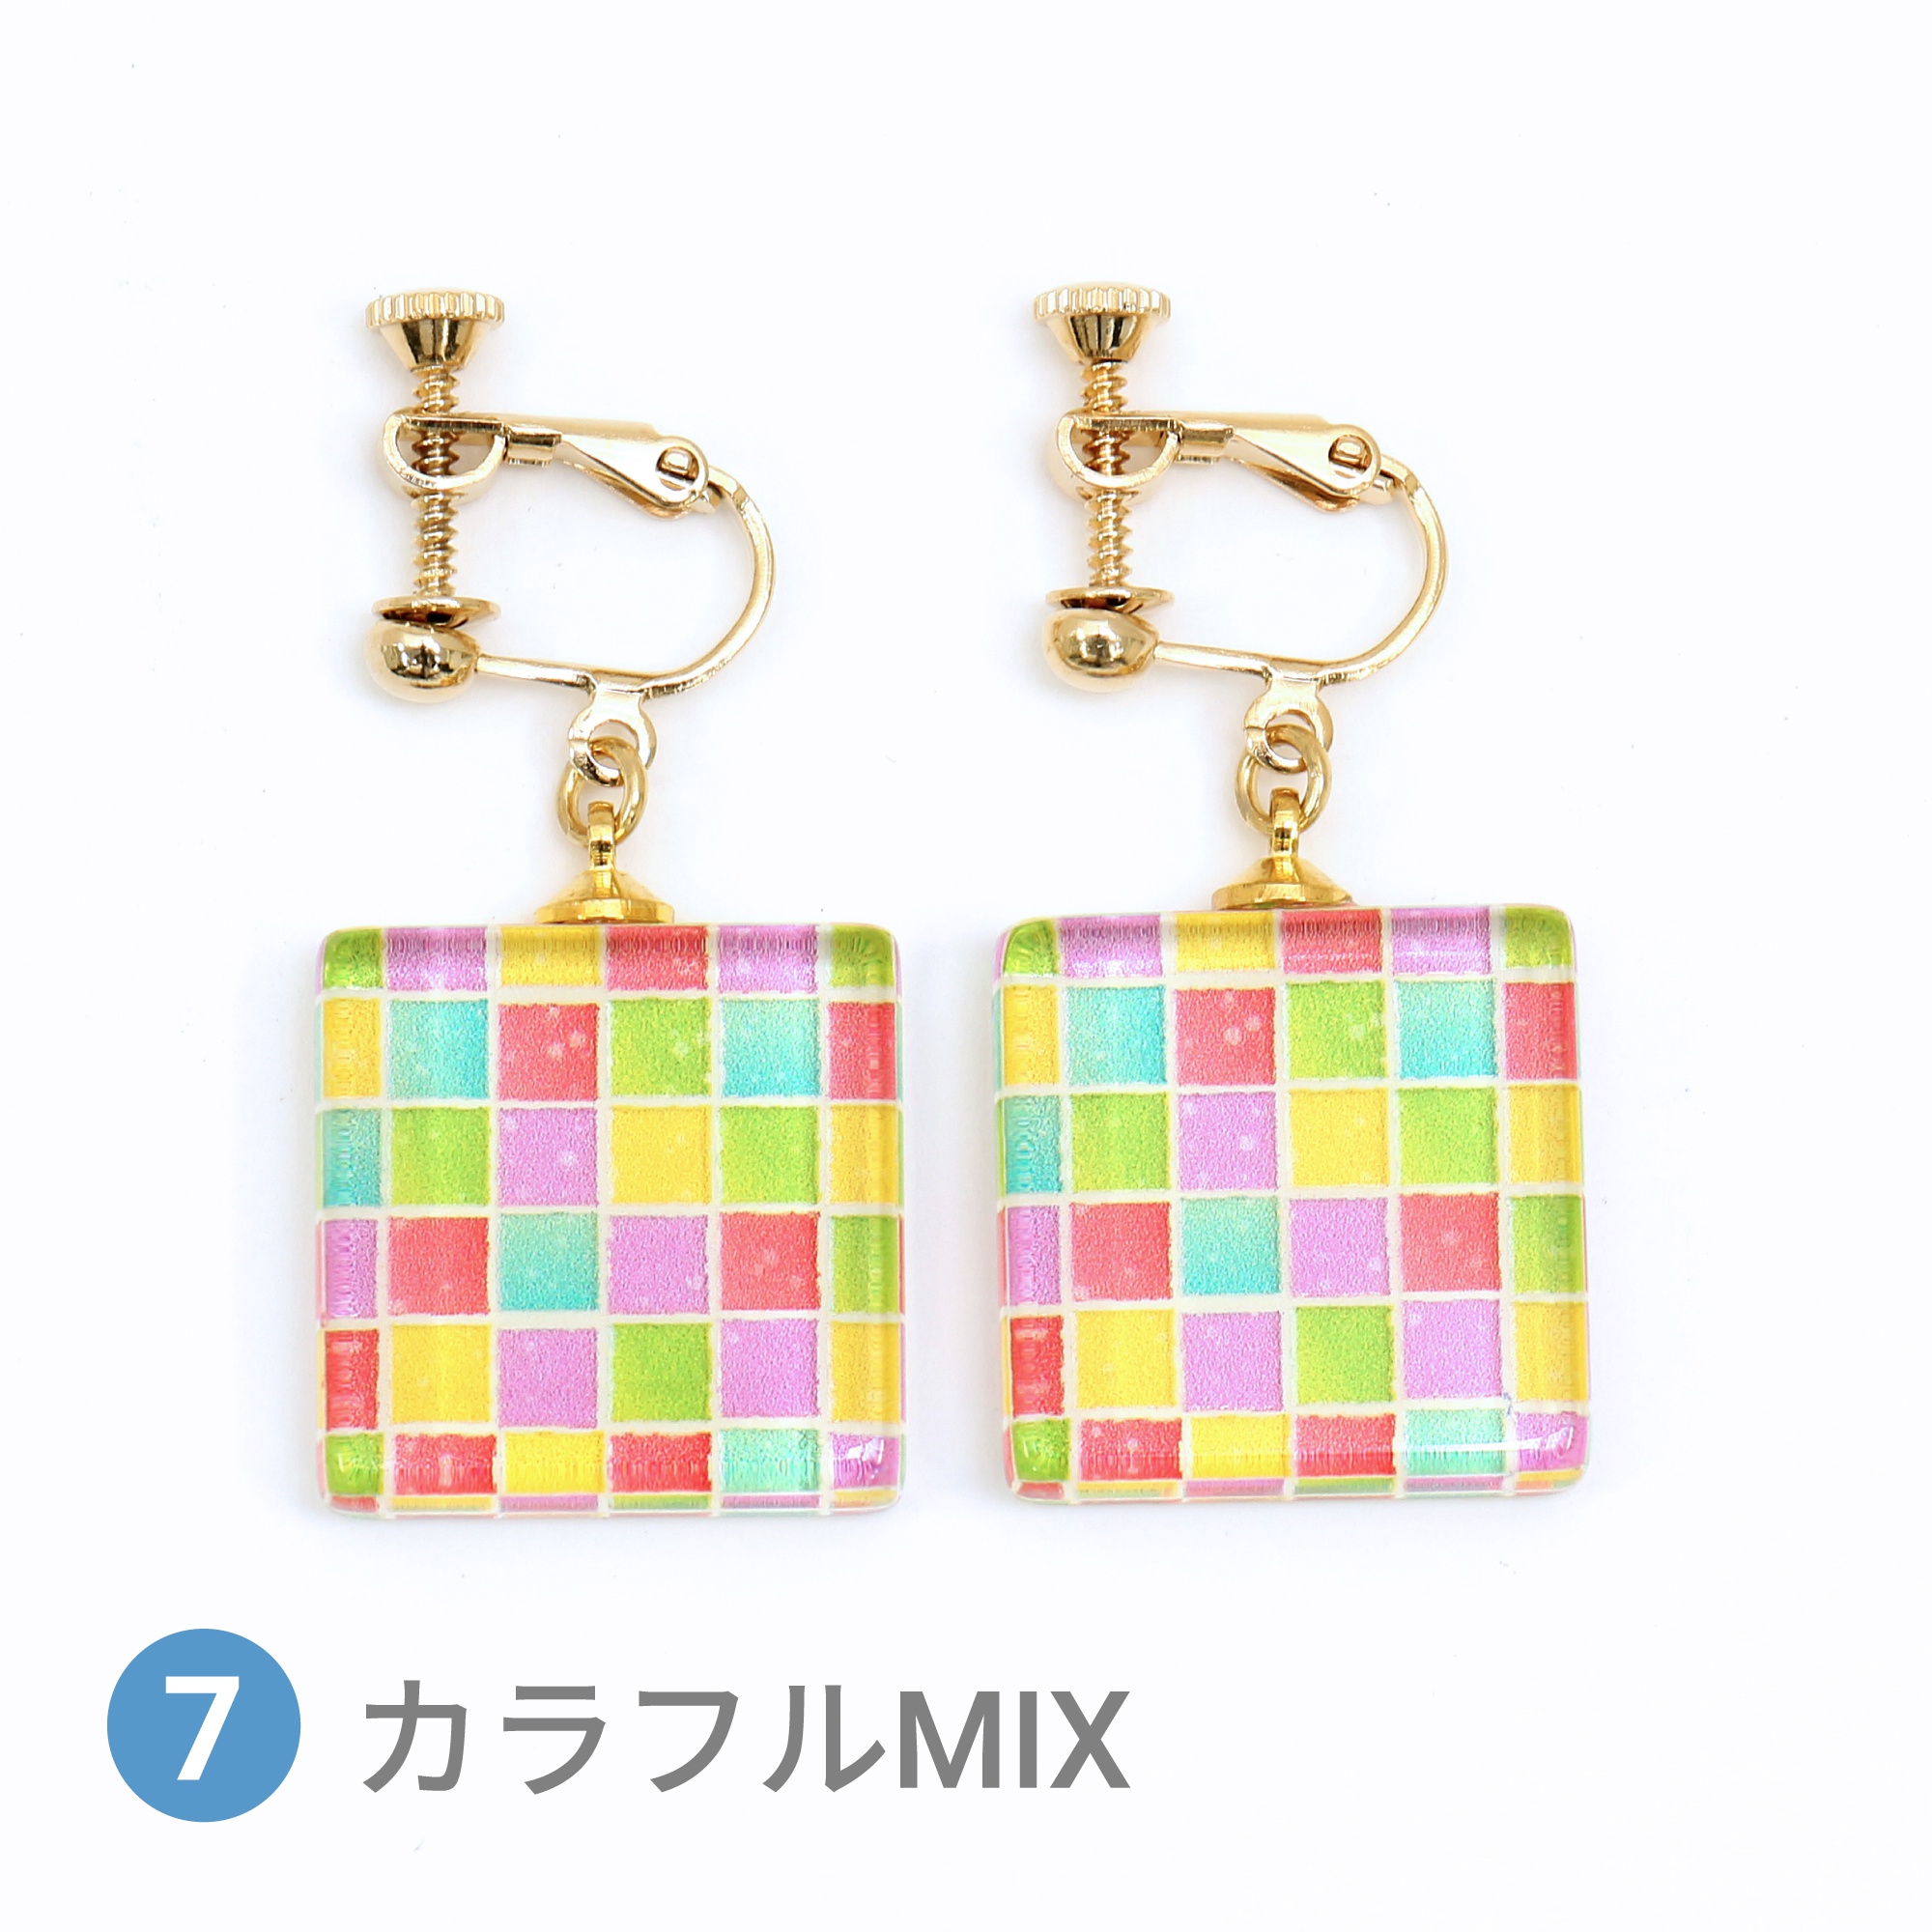 Glass accessories Earring TILE colorful mix square shape